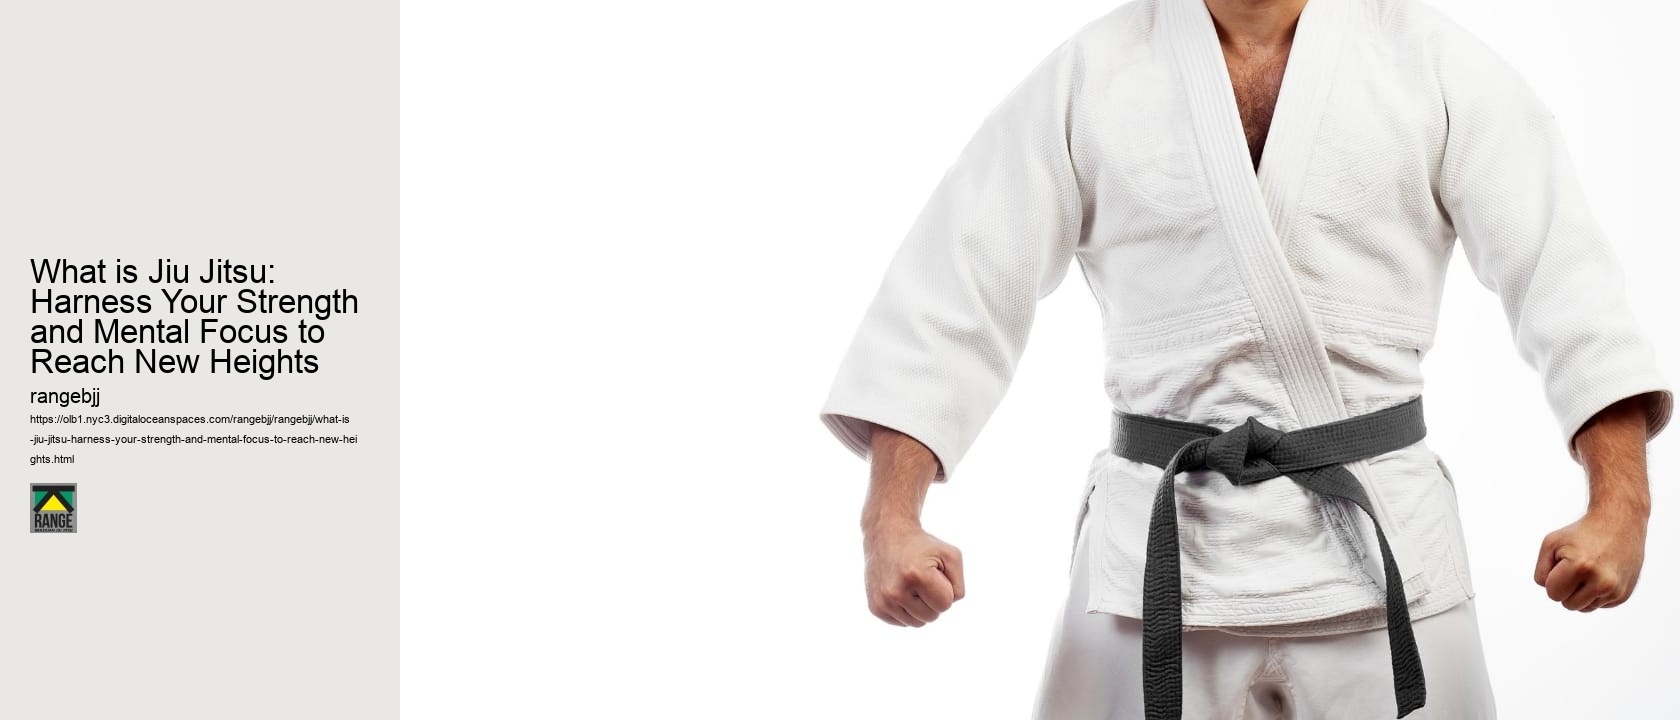 What is Jiu Jitsu: Harness Your Strength and Mental Focus to Reach New Heights 